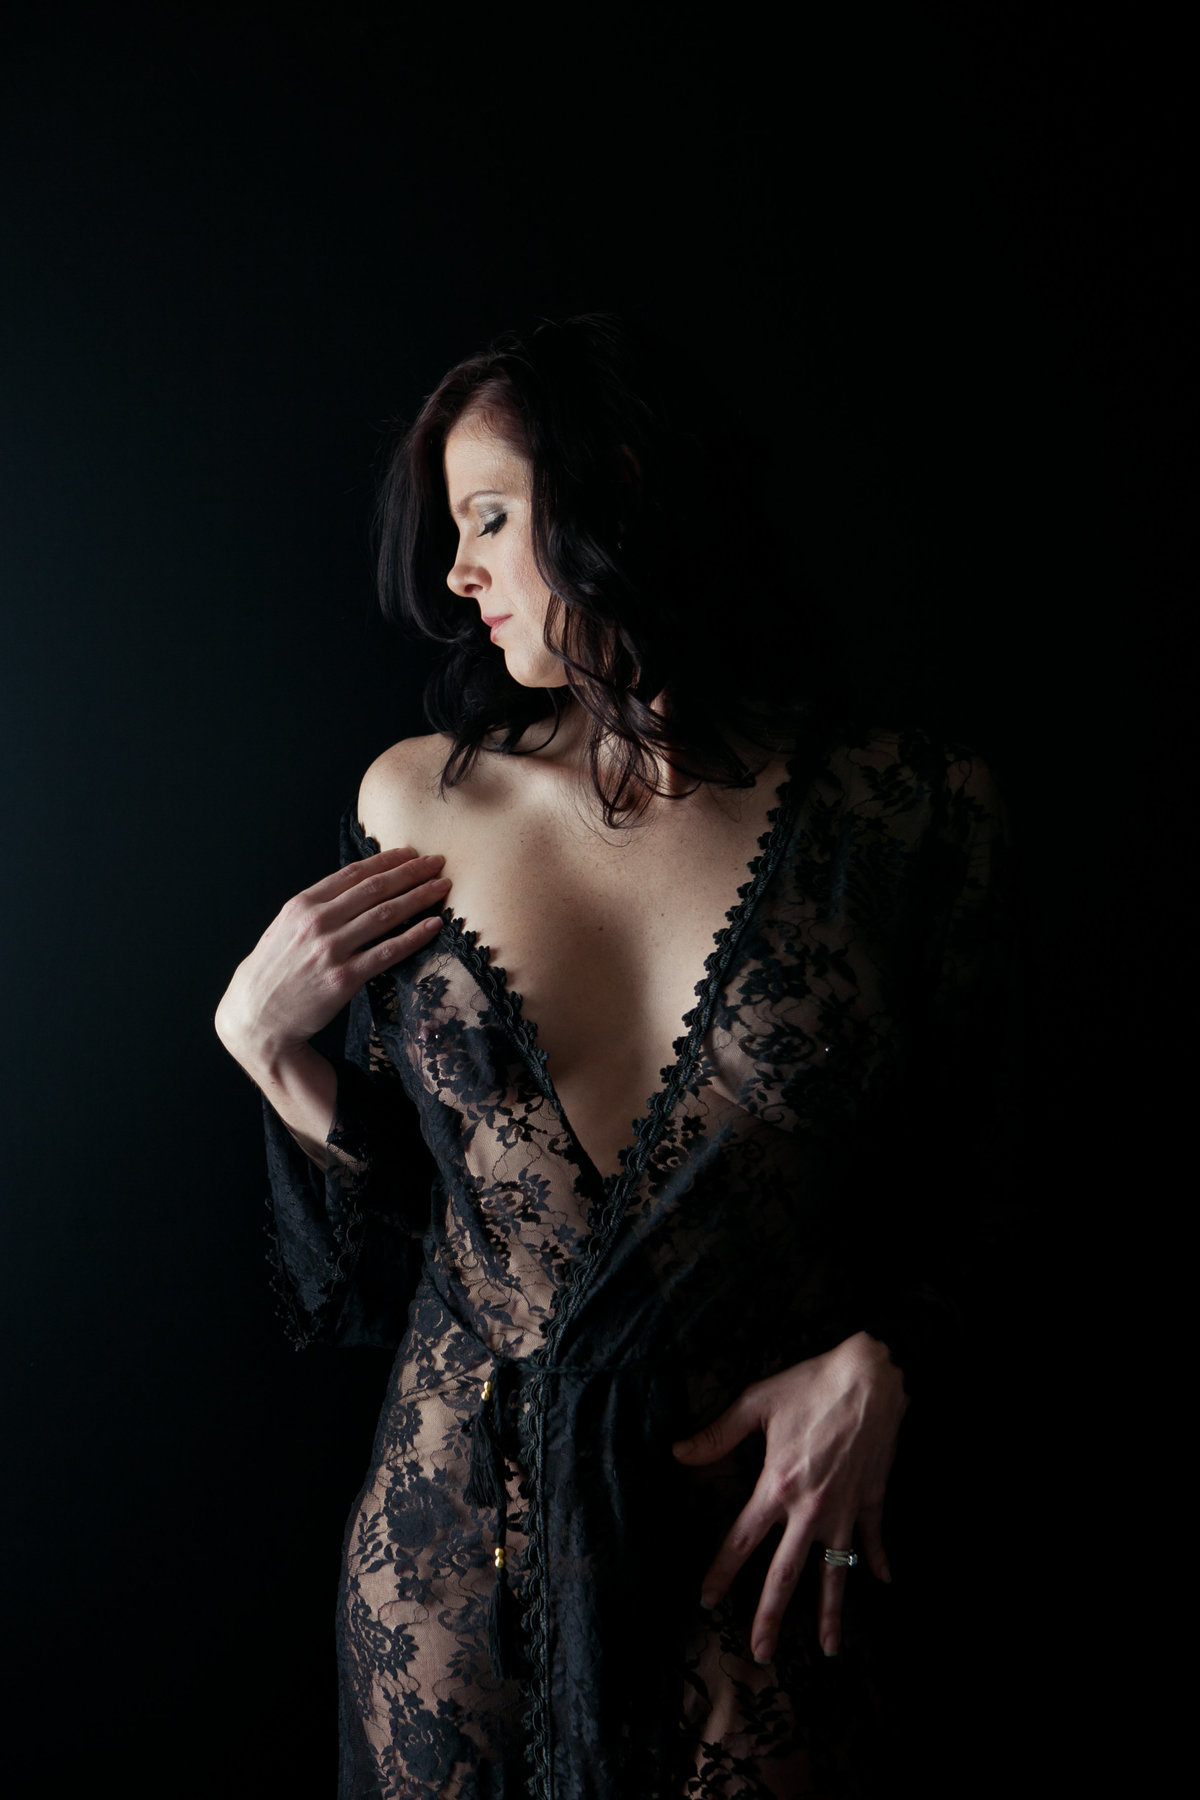 image taken in a New York City Photography Studio by a boudoir photographer. beautiful woman in a black lace robe on a black background